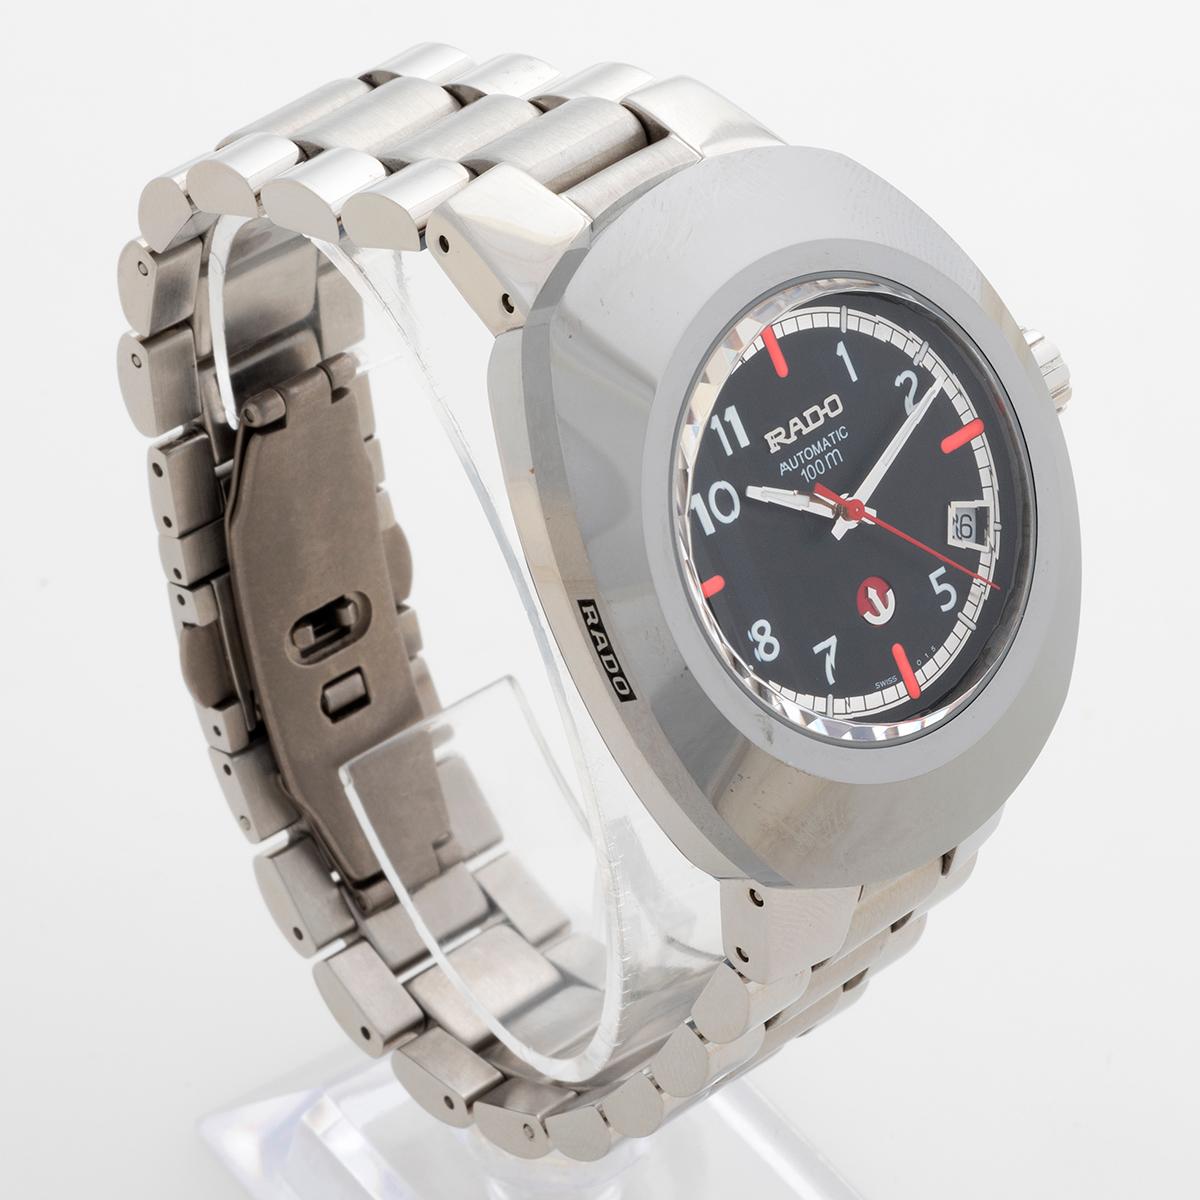 Our Rado Diastar XL reference automatic features a 38mm case in 'scratchproof' material with bracelet and titanium clasp. Presented in outstanding condition with very little sign of use from new, we date this unusual and attractive Rado to circa